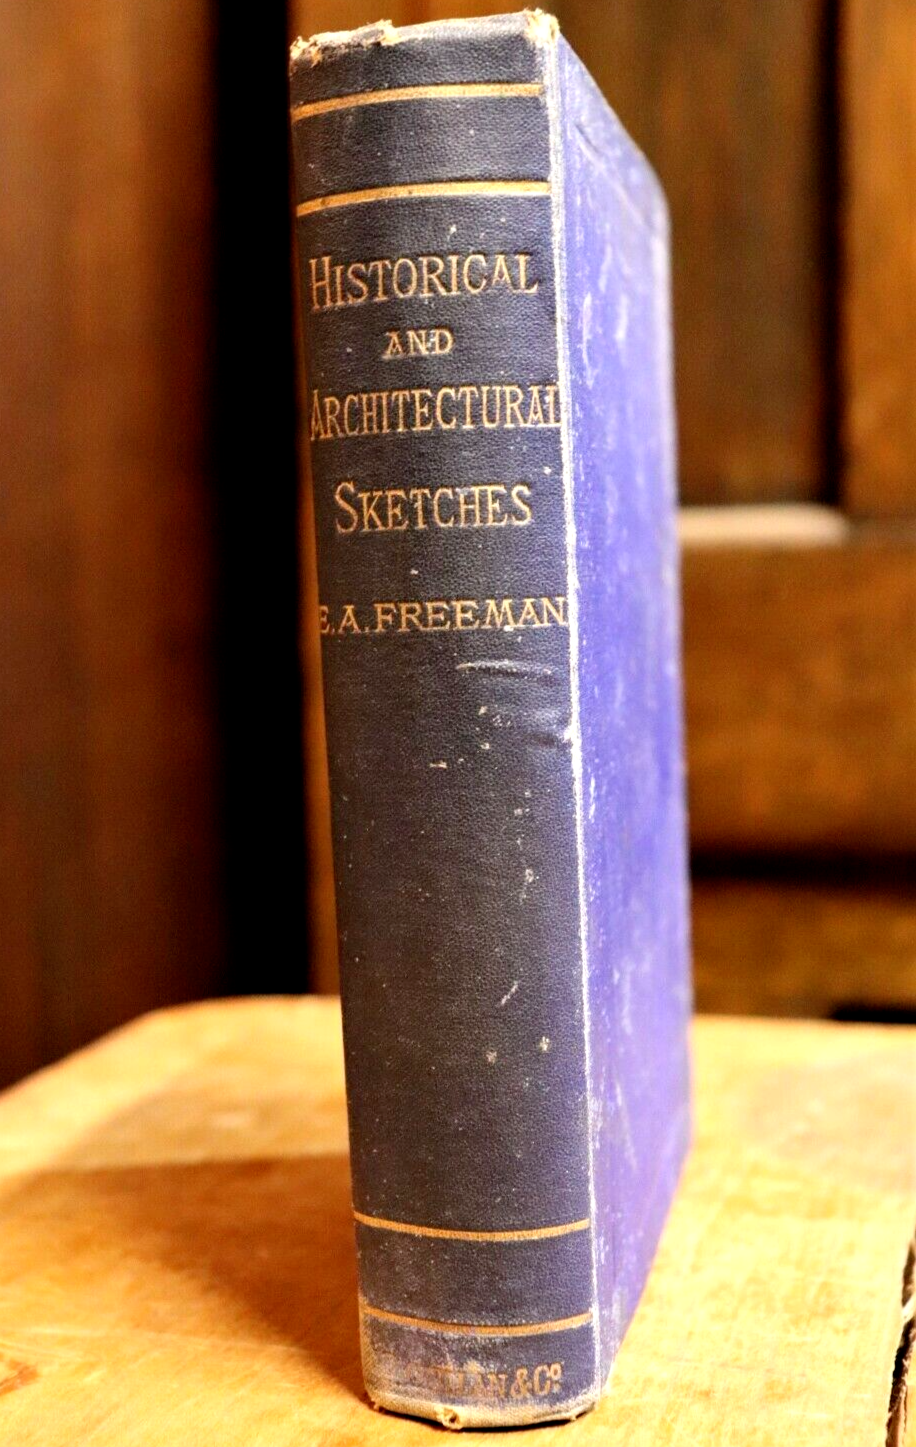 1876 Historical & Architectural Sketches by EA Freeman 1st Edition Antique Book